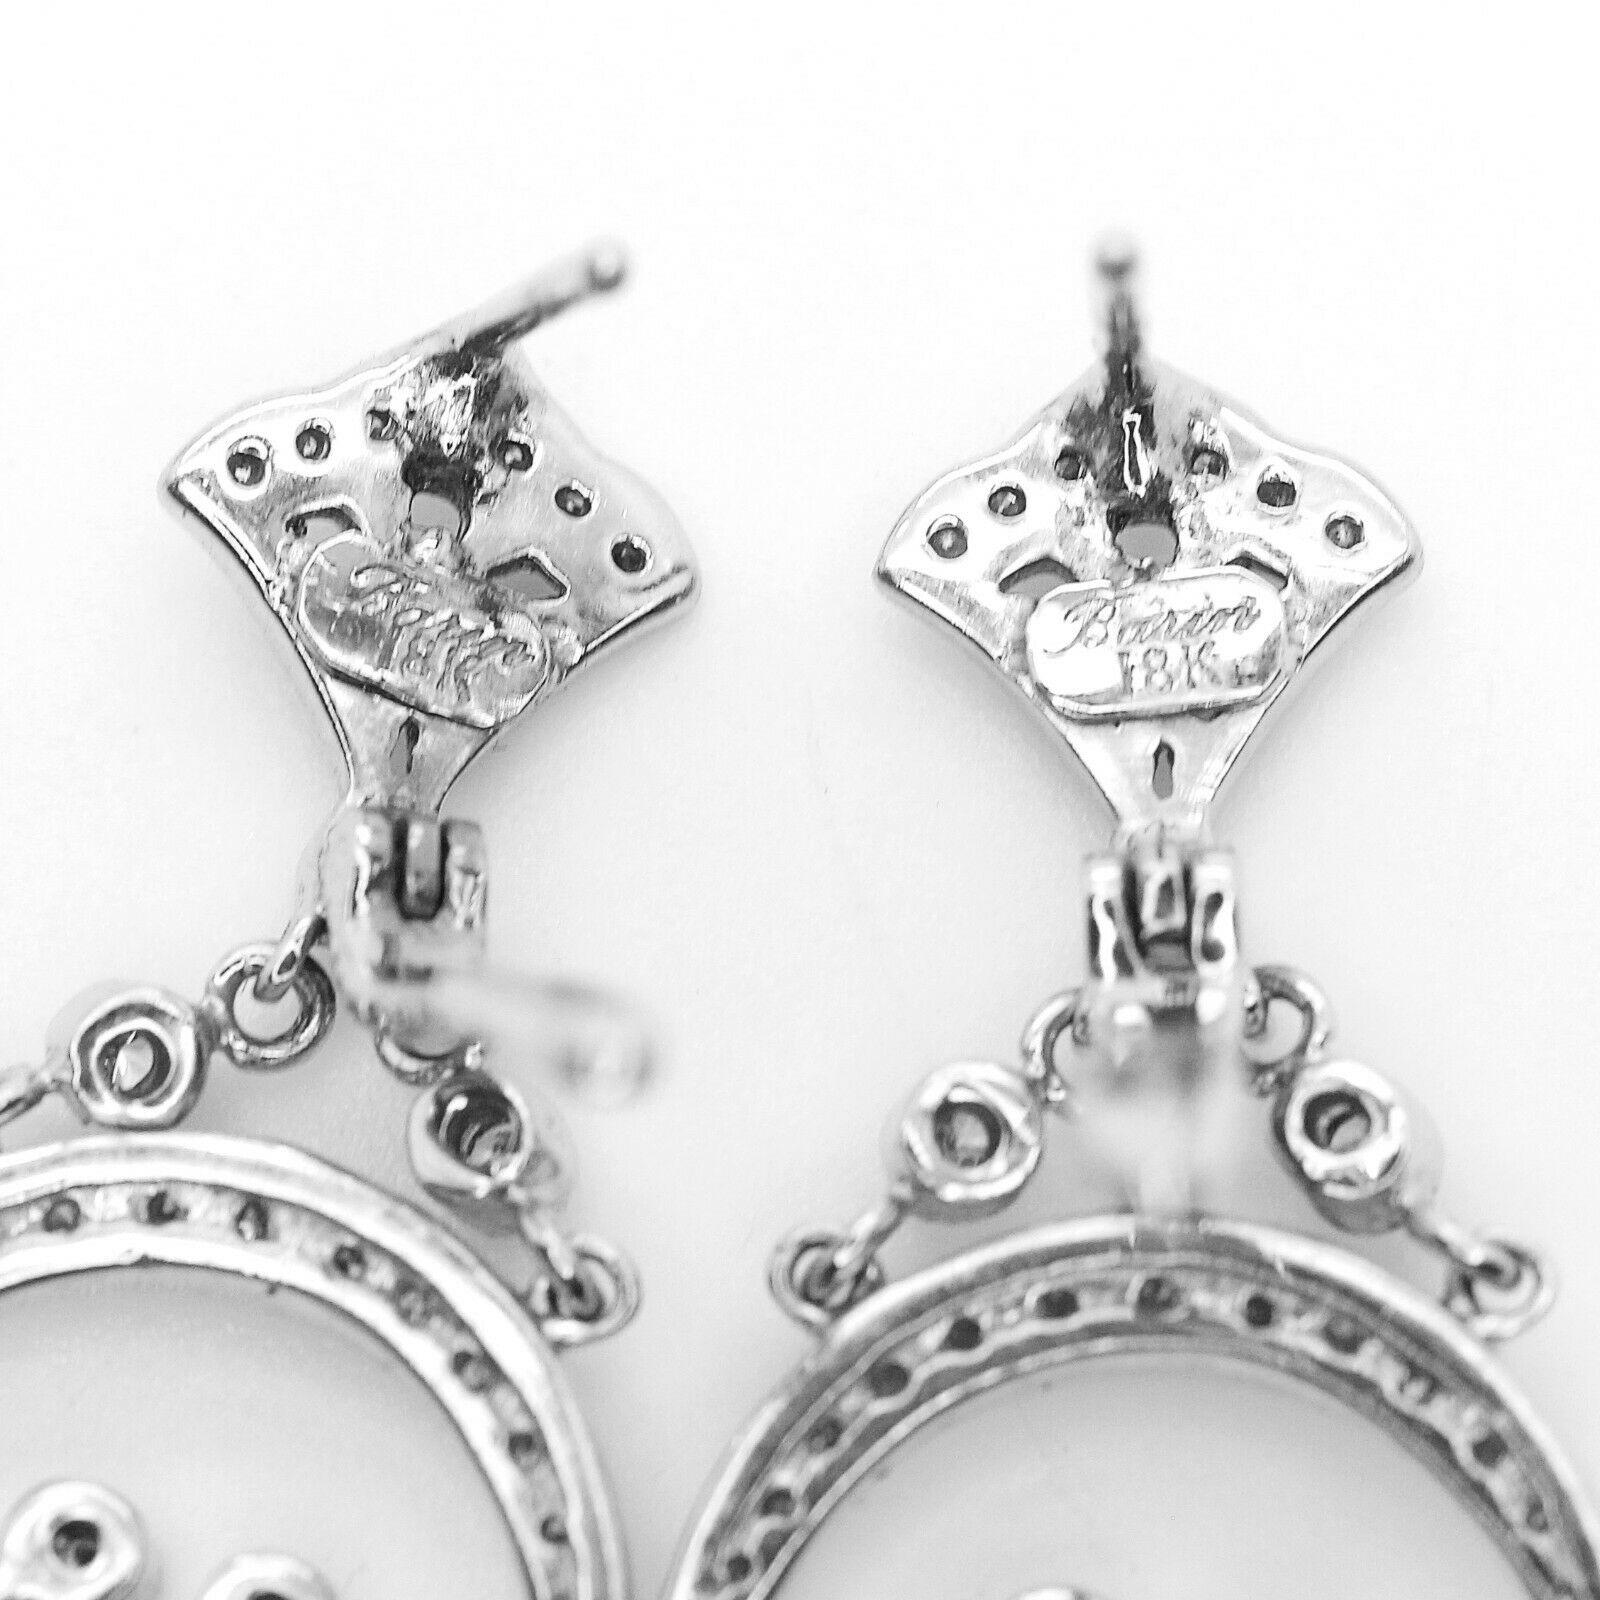 Discover diamond decadence with these dramatic chandelier earrings. At 2.75 inch in length with approximately 1.75 carat of round and marquise brilliant diamonds with a color of g and has a clarity of VS2 set in gleaming 18k white gold, they are a